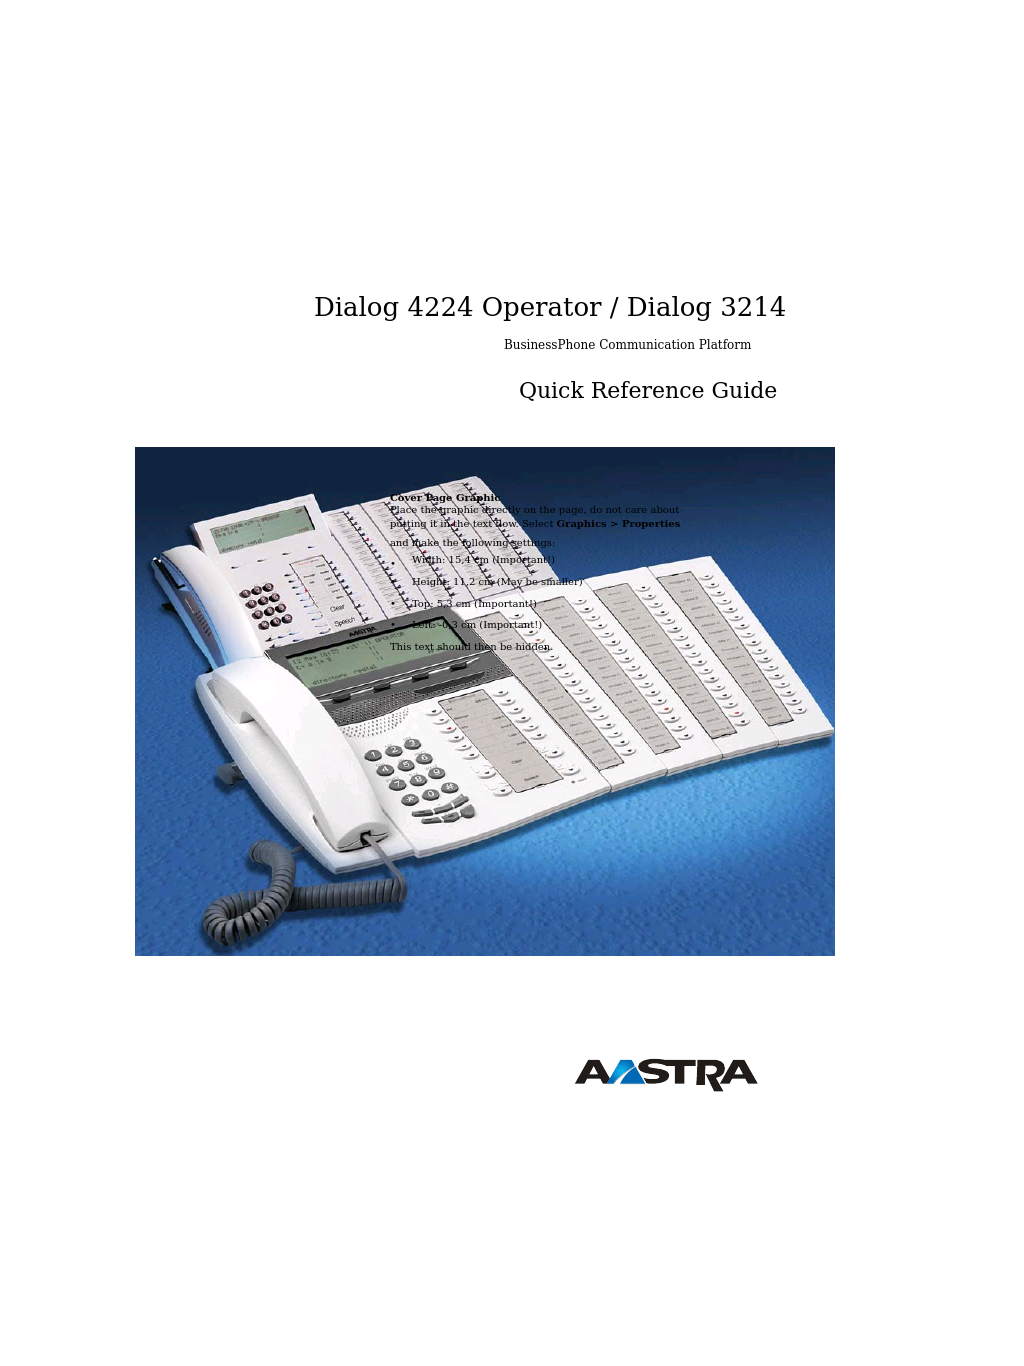 4224 Operator for BusinessPhone Quick Reference Guide